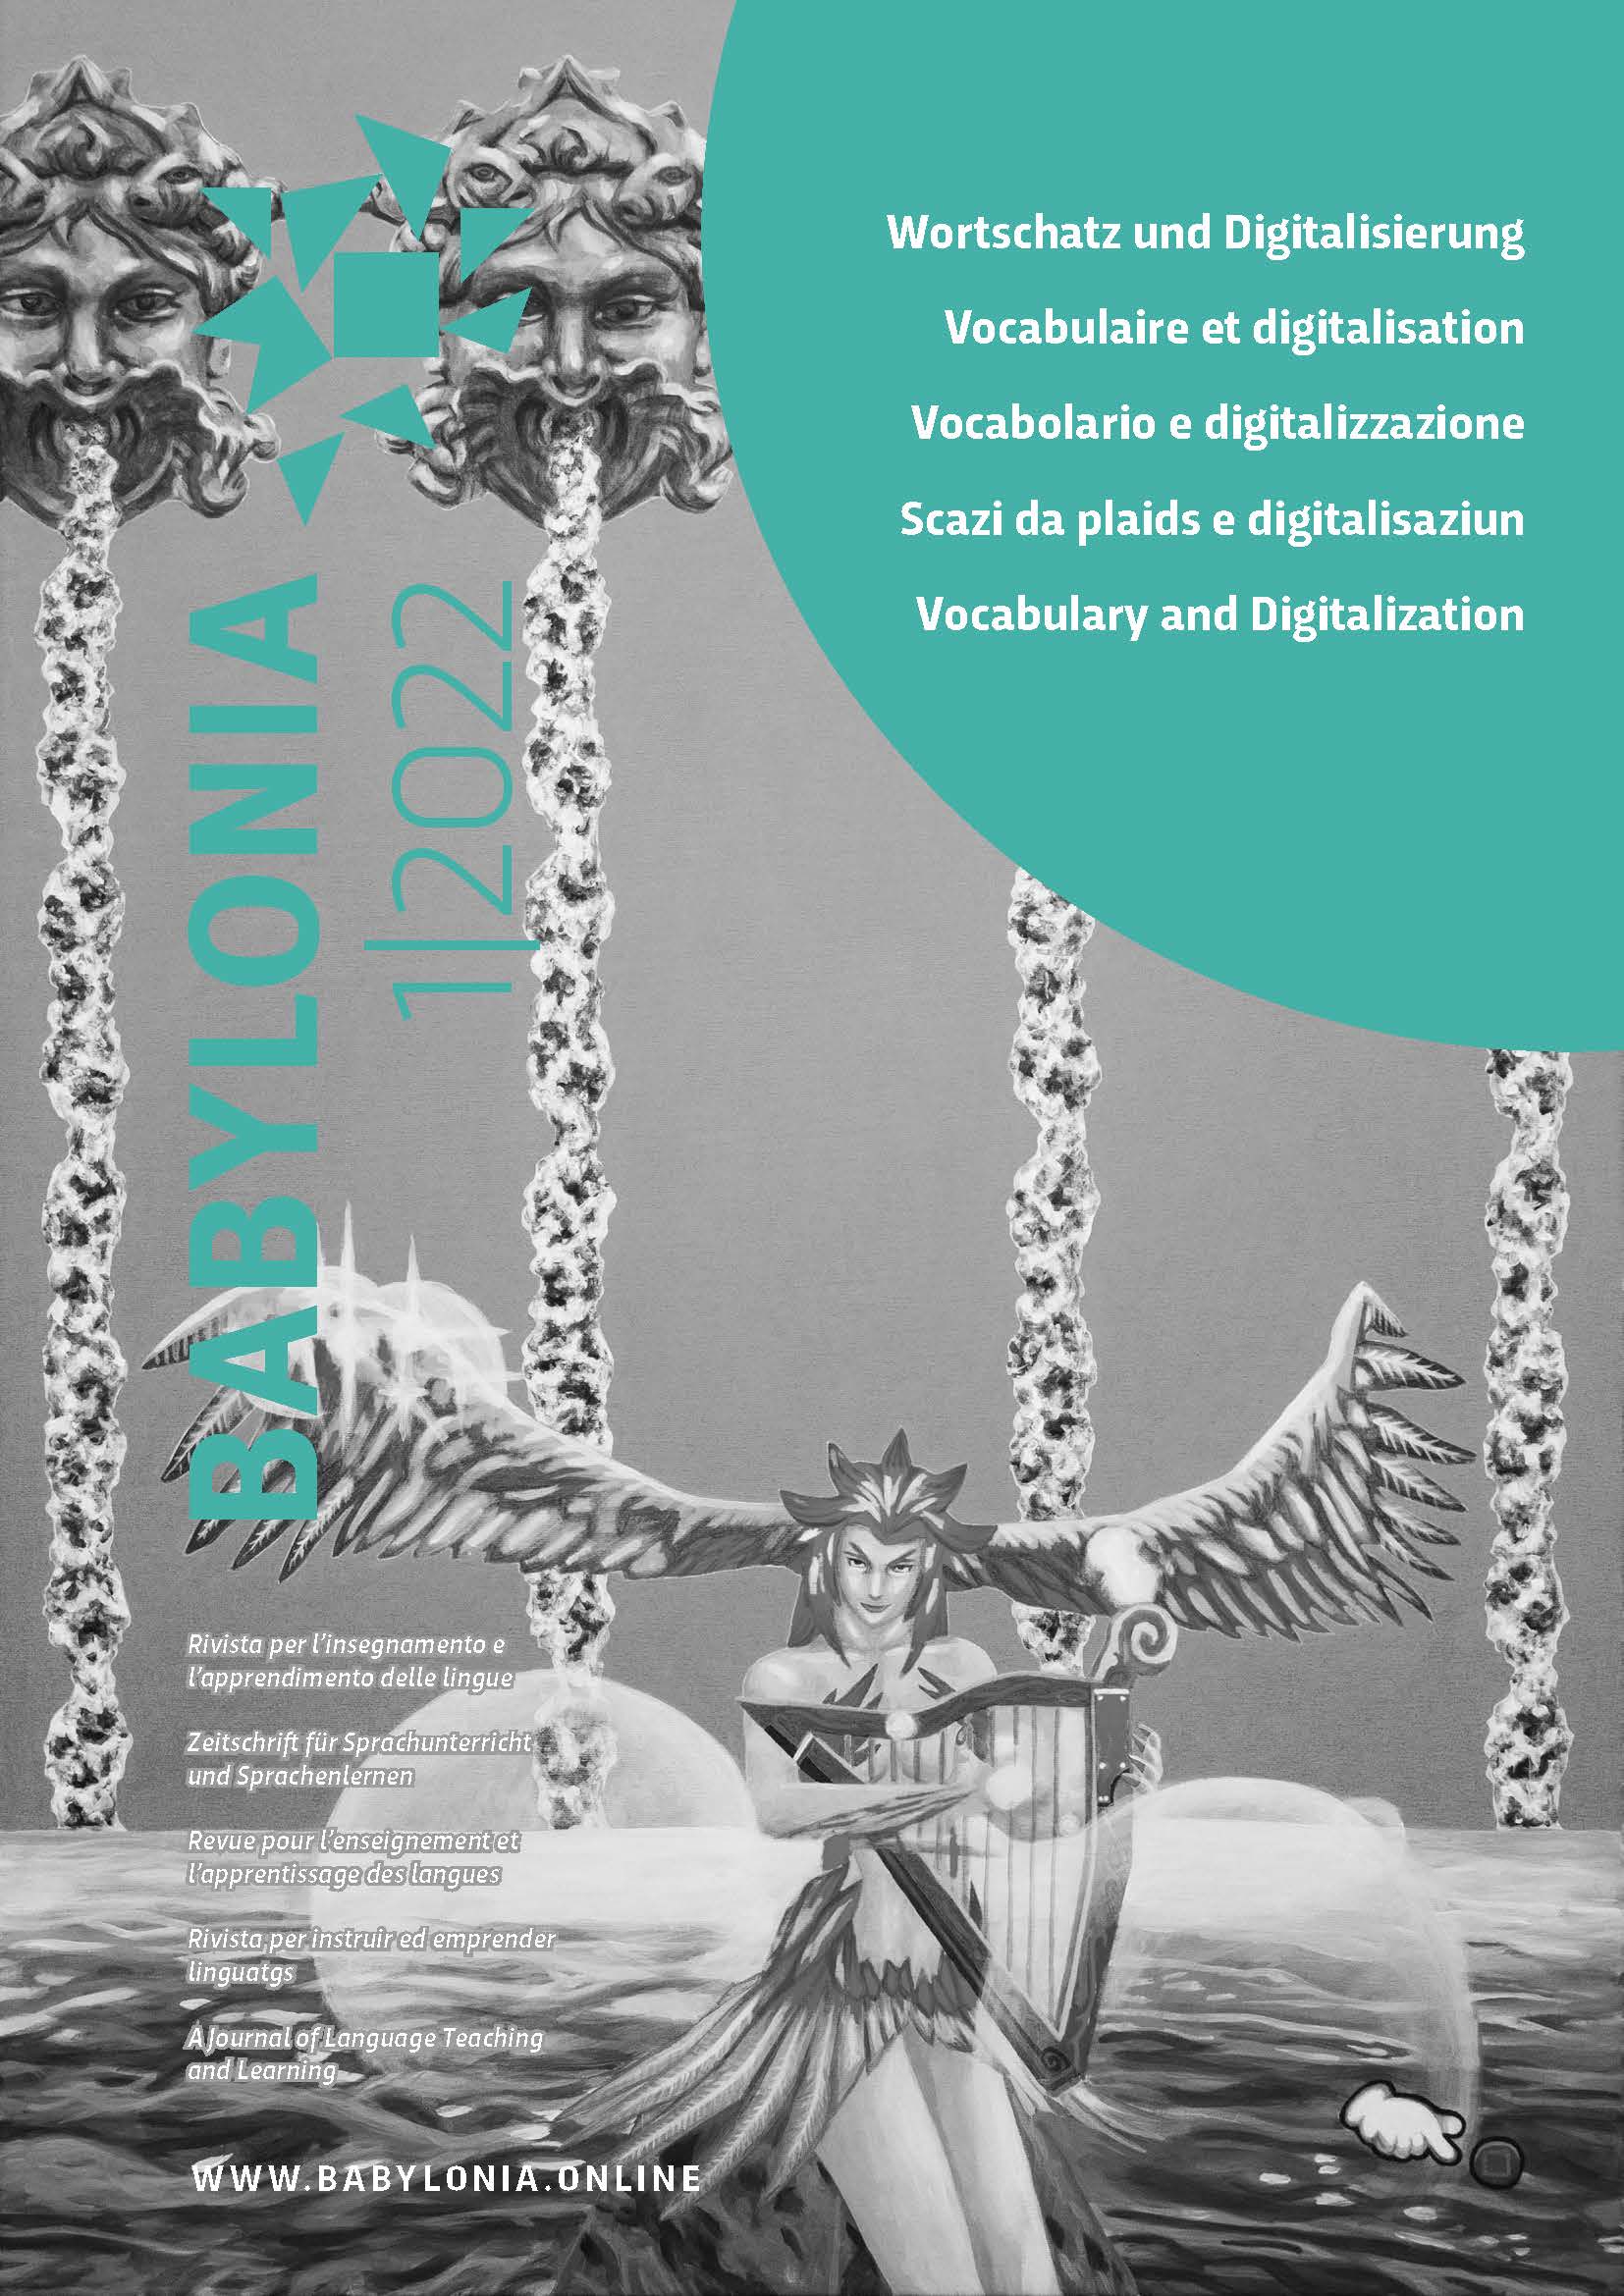 					View Vol. 1 (2022): Vocabulary and Digitalization
				